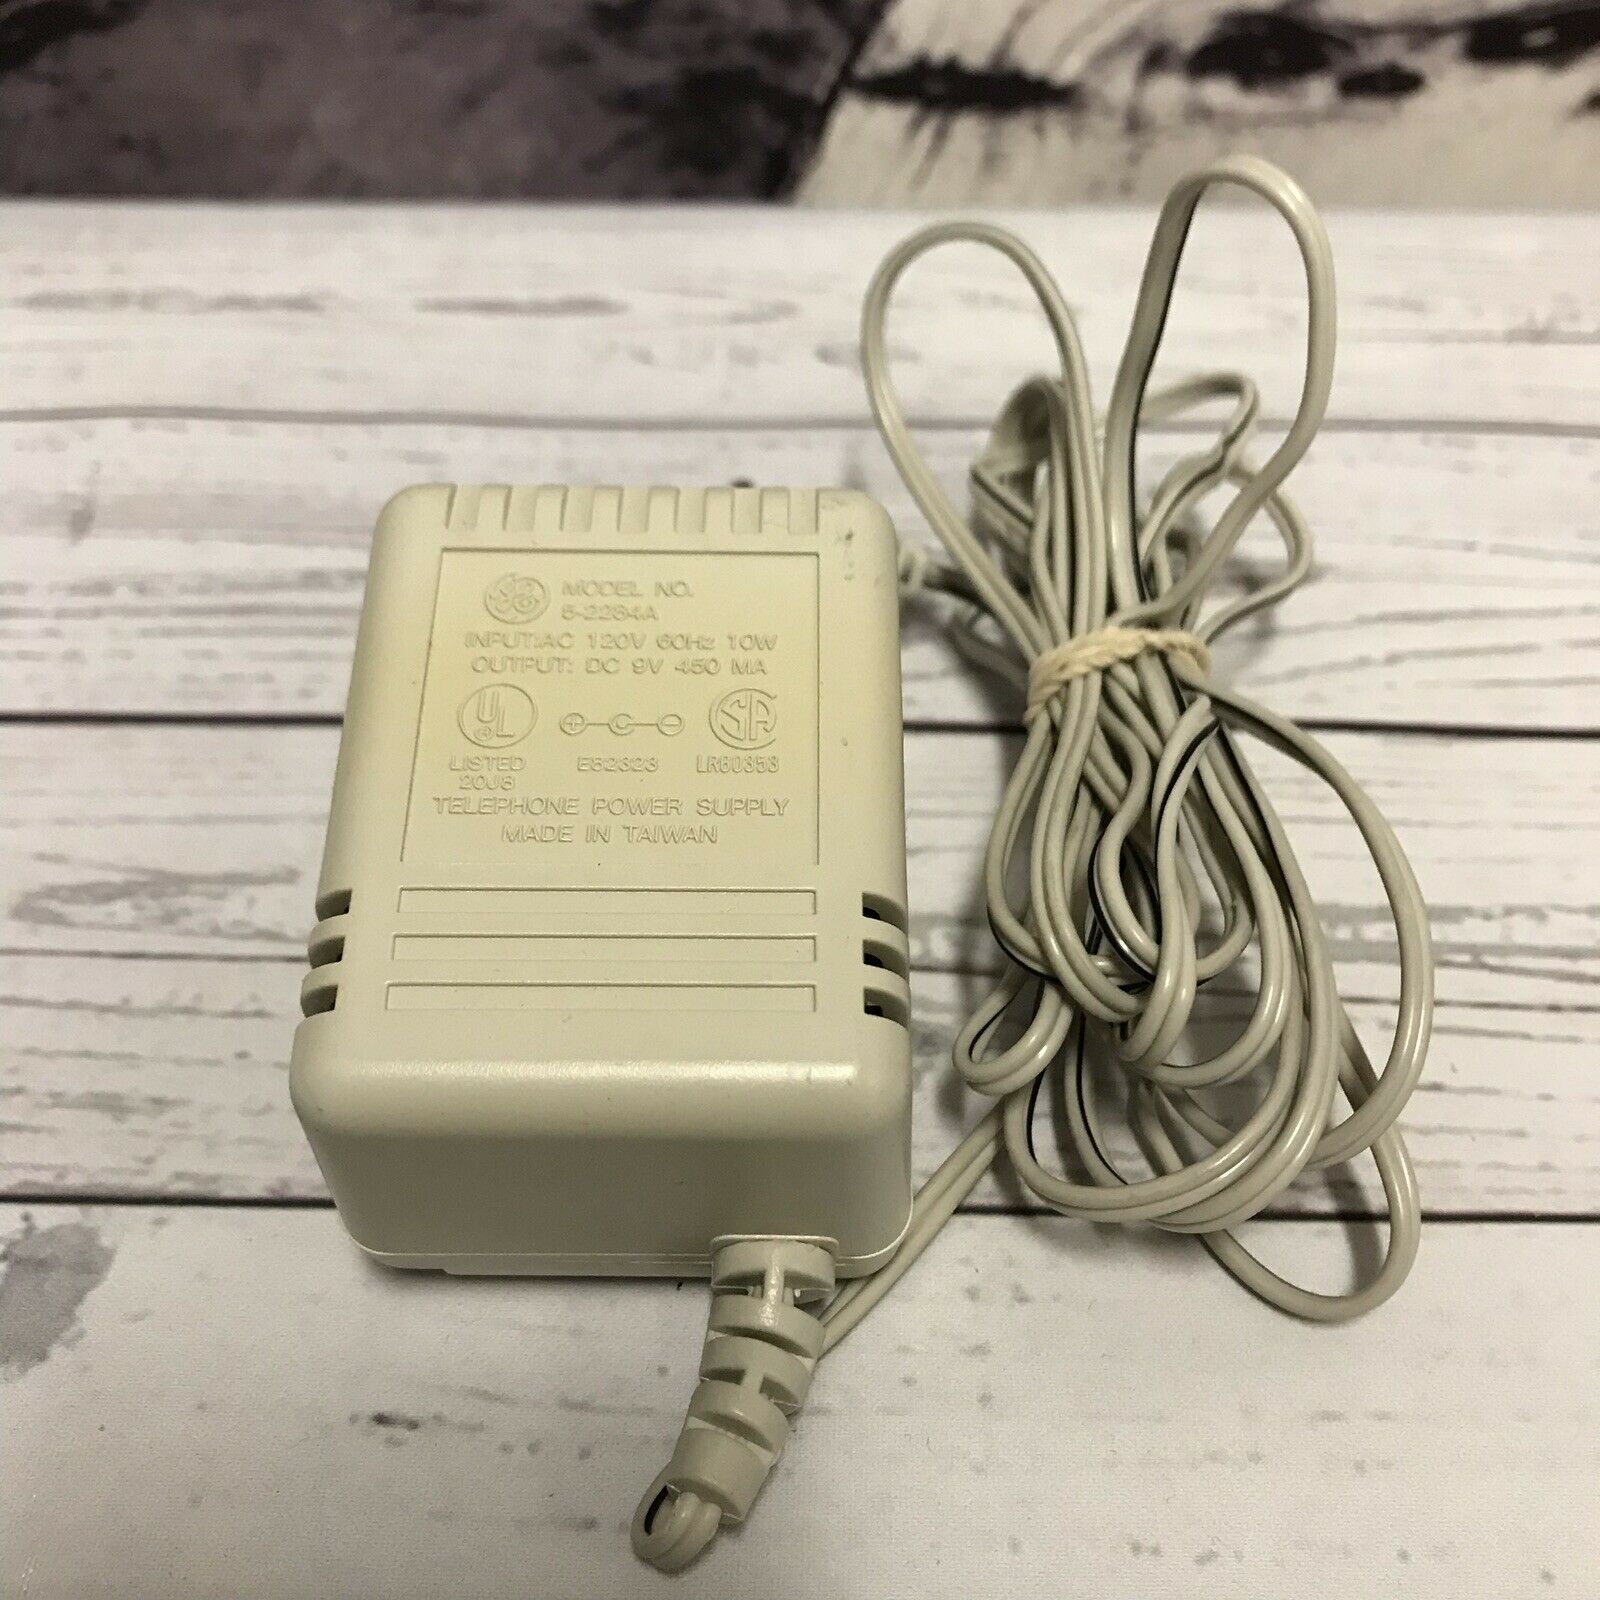 General Electric 5-2284A AC Adapter Power Supply Charger DC 9V 450mA Output Model: 5-2284A Output Voltage: 9VDC MPN